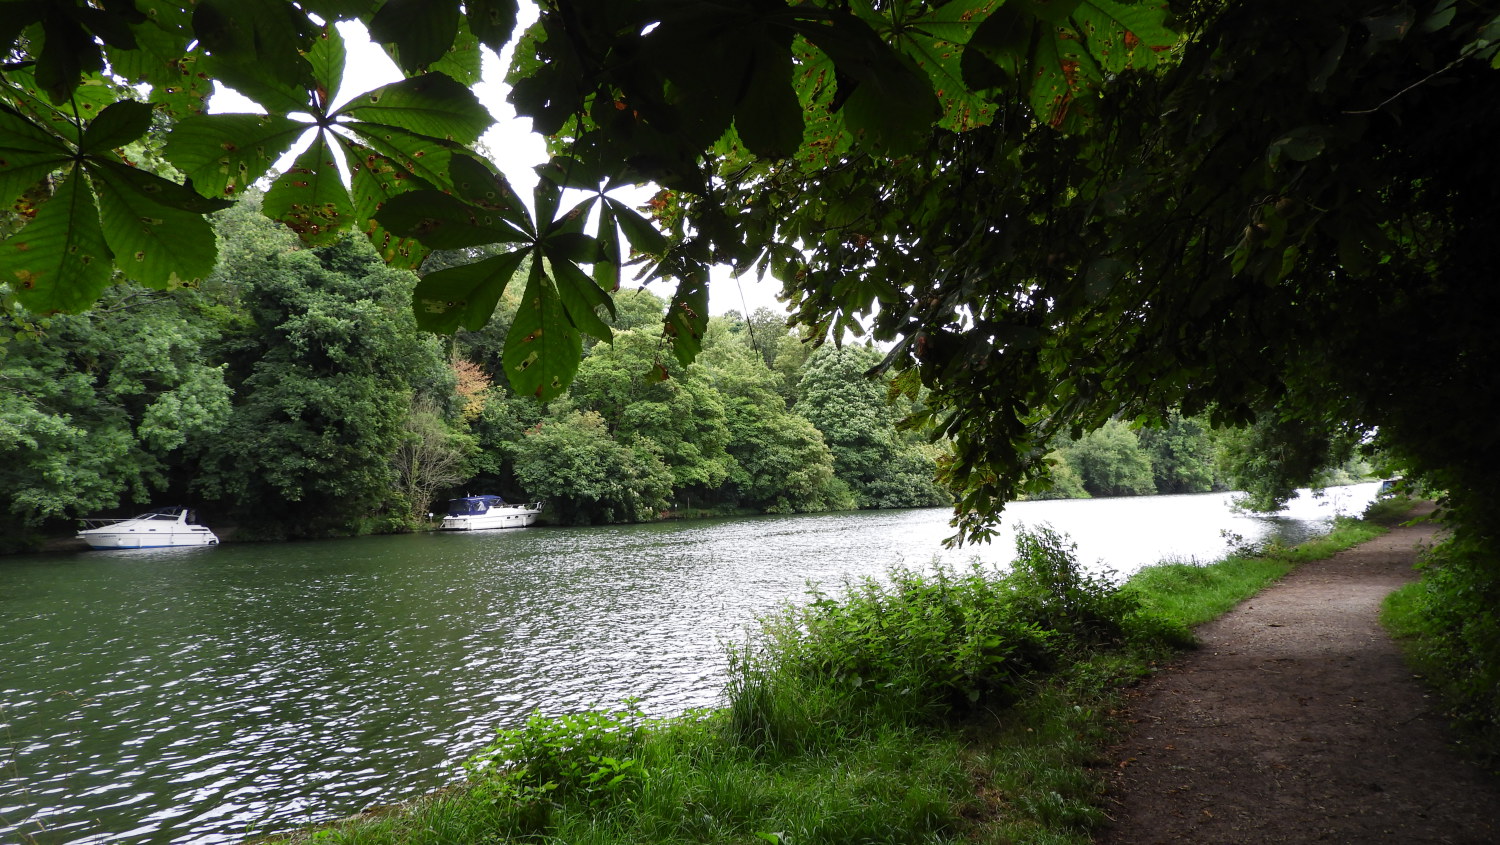 Following the Thames Path to Maidenhead